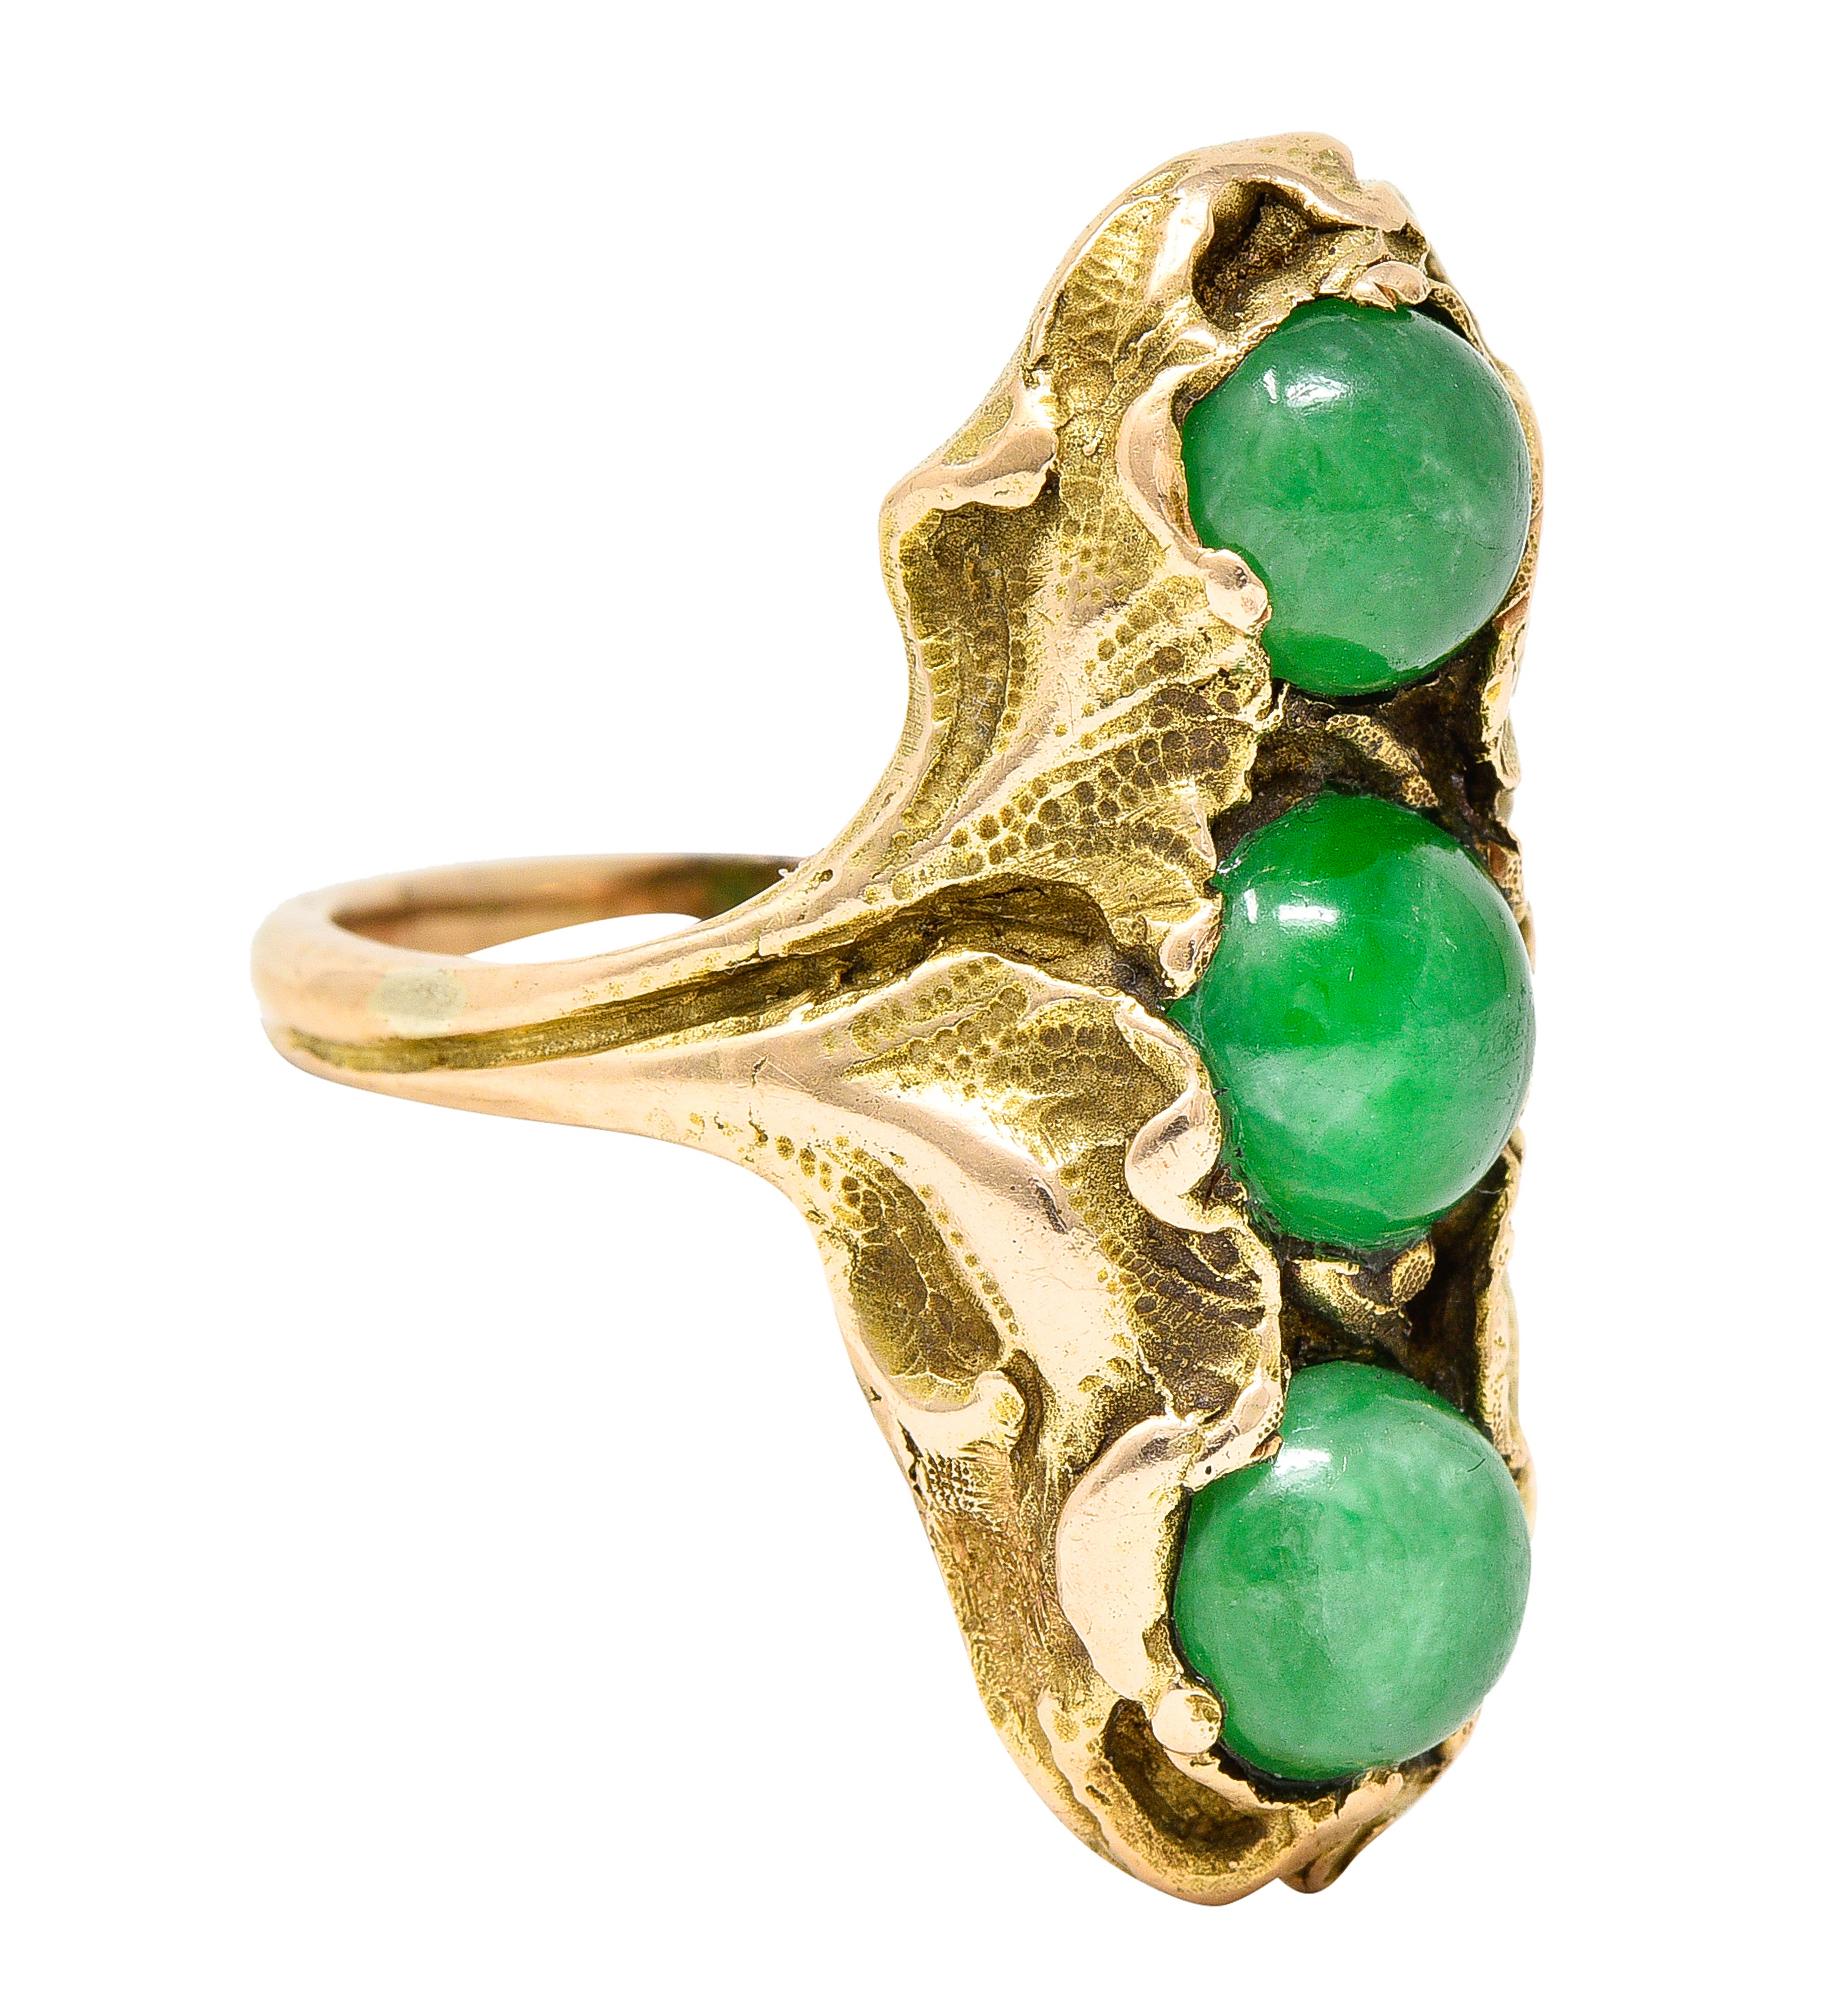 Ring is highly rendered as stylized ginkgo leaf foliate. Encompassing three round jade cabochons. Set North to South while measuring 7.0 mm to 6.0 mm. Translucent and vividly green in color with moderate mottling - good polish. Stamped 14K for 14